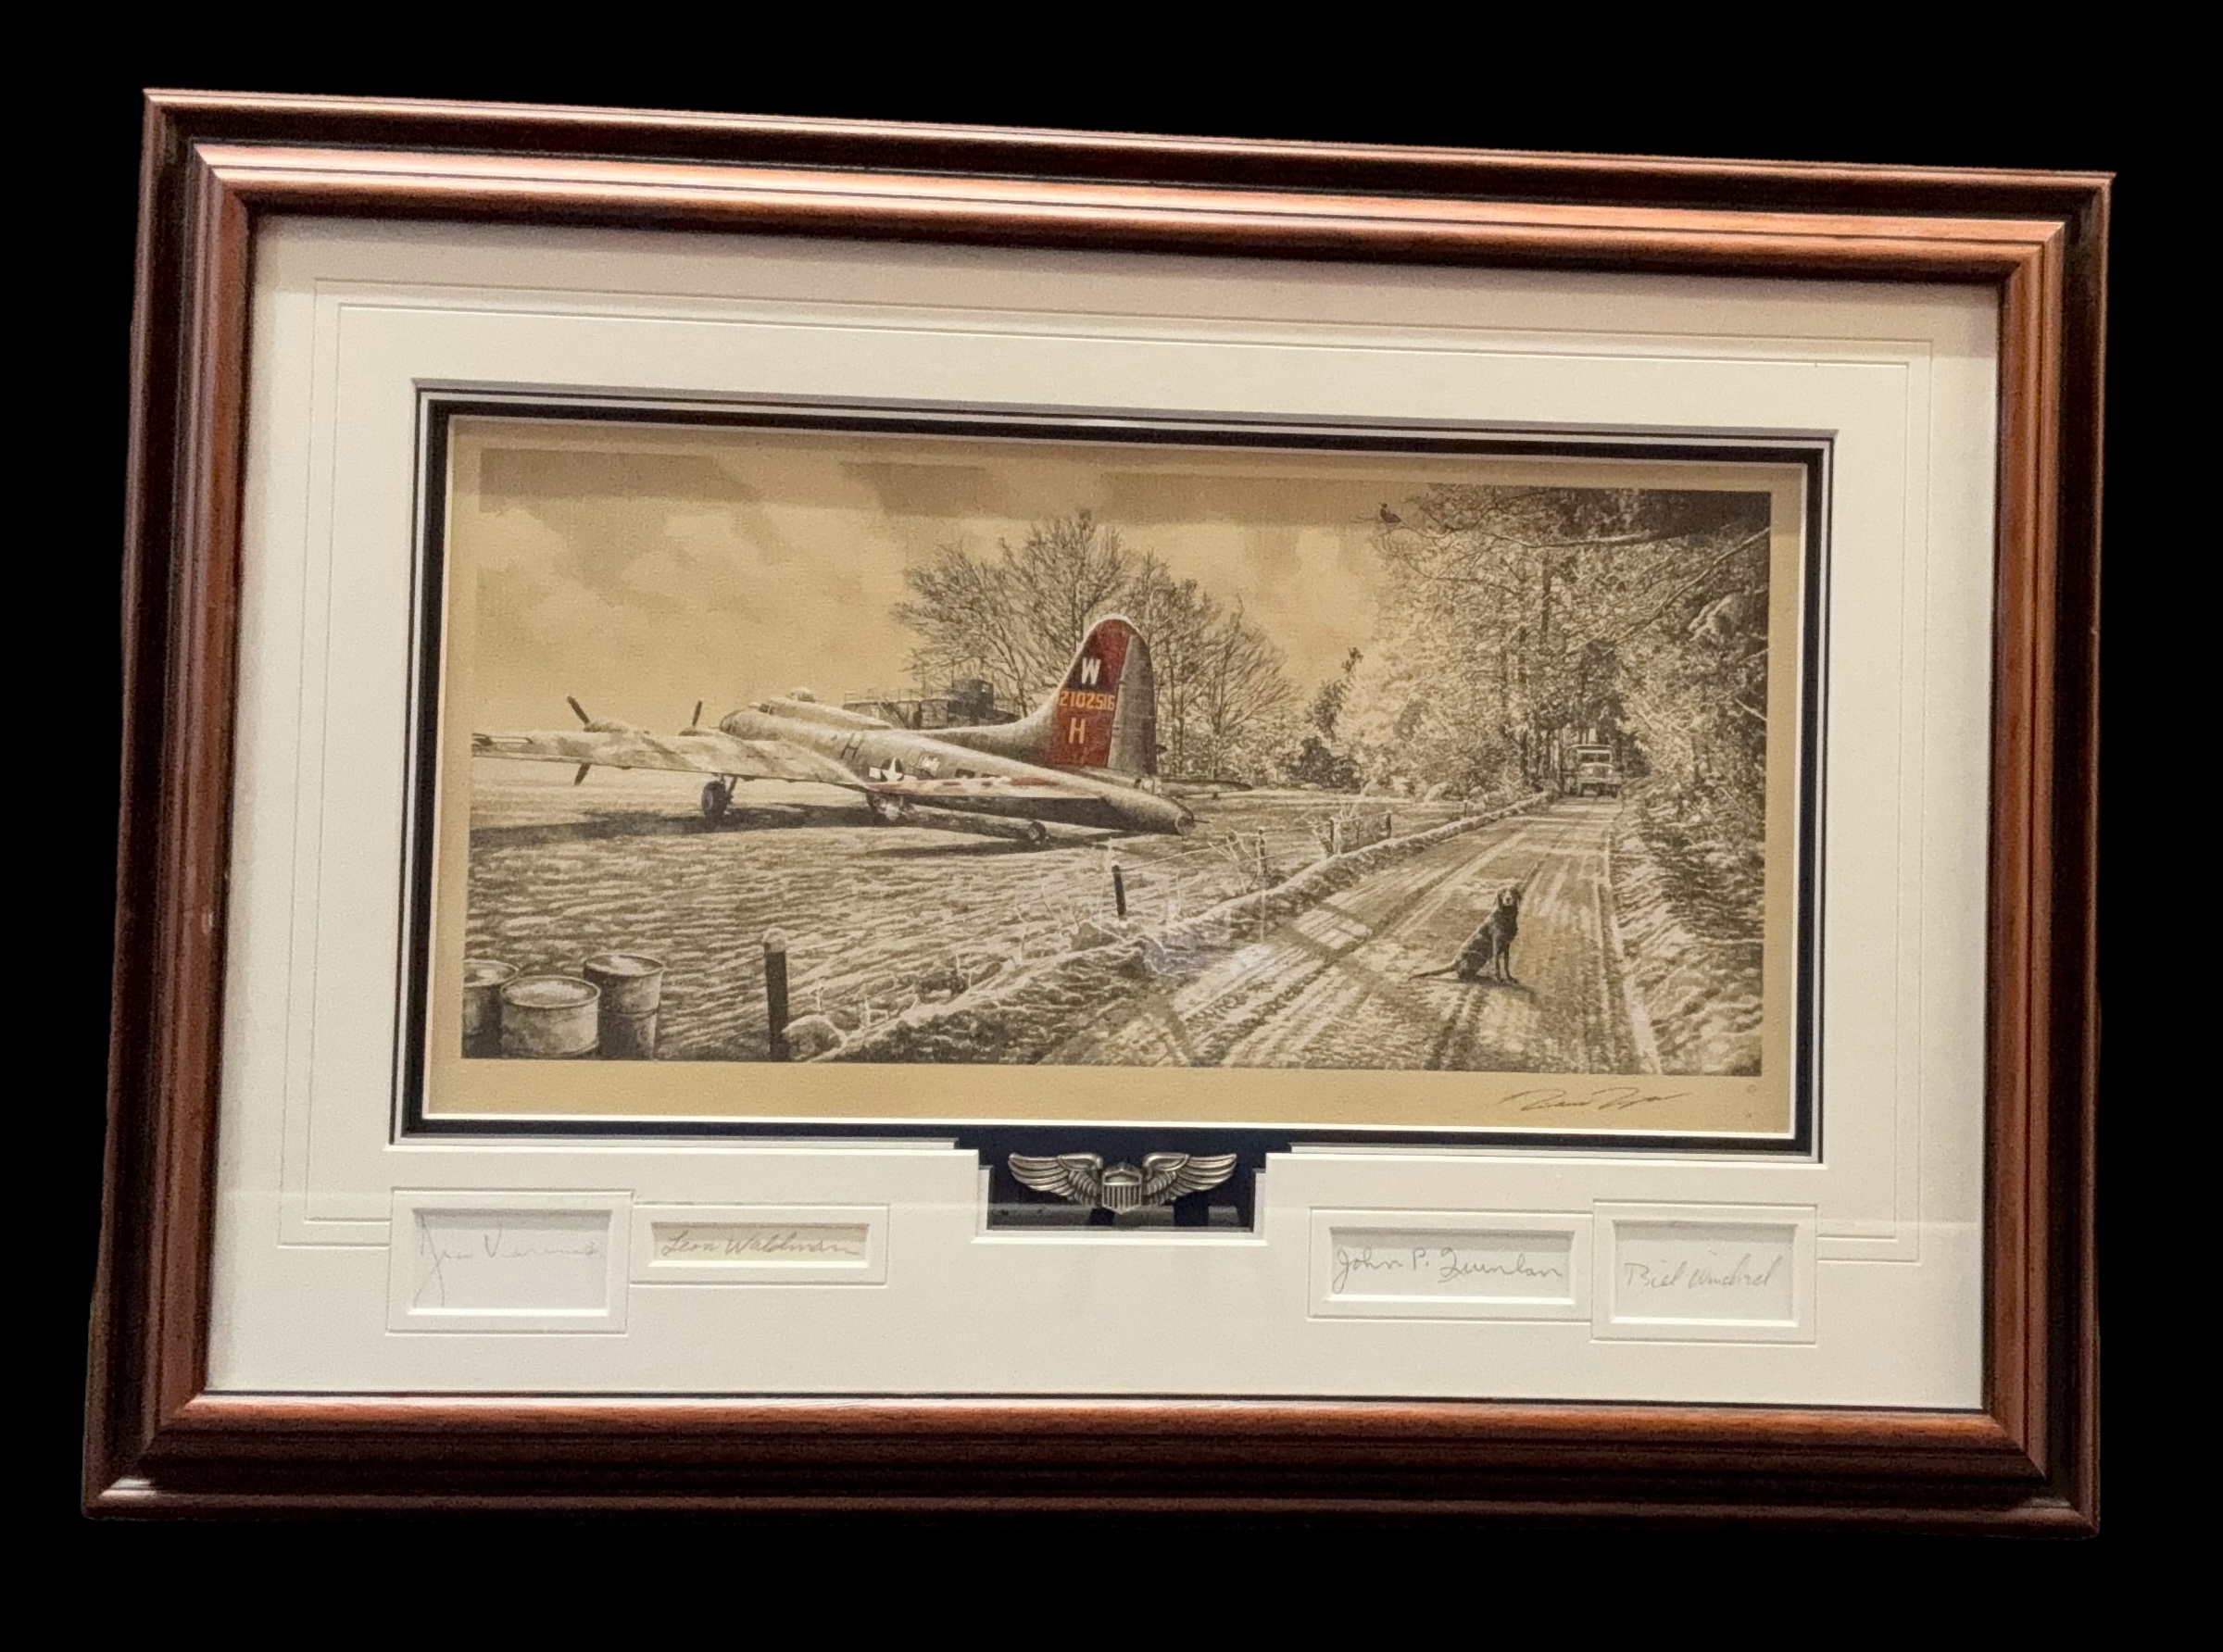 WW2 Print titled Fortress at Rest by Richard Taylor, multi signed by the artist Richard Taylor and